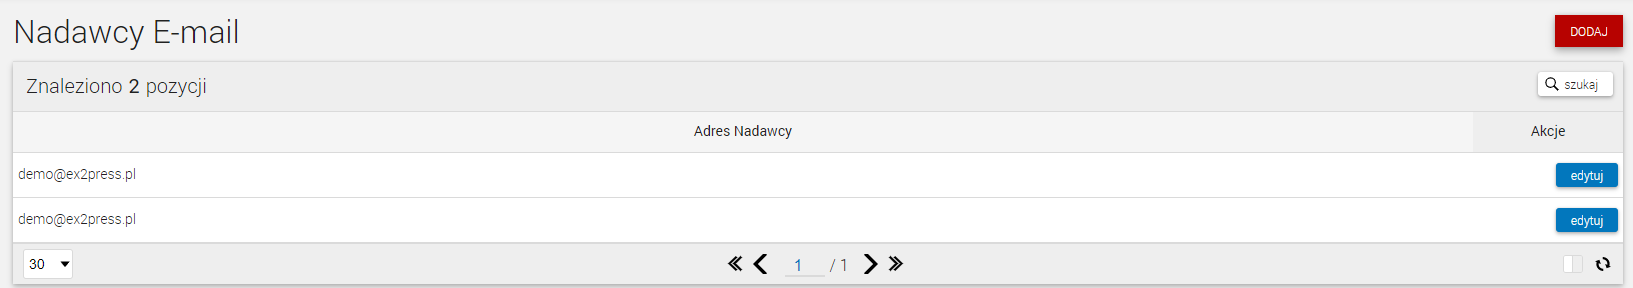 nadawcy_email.png